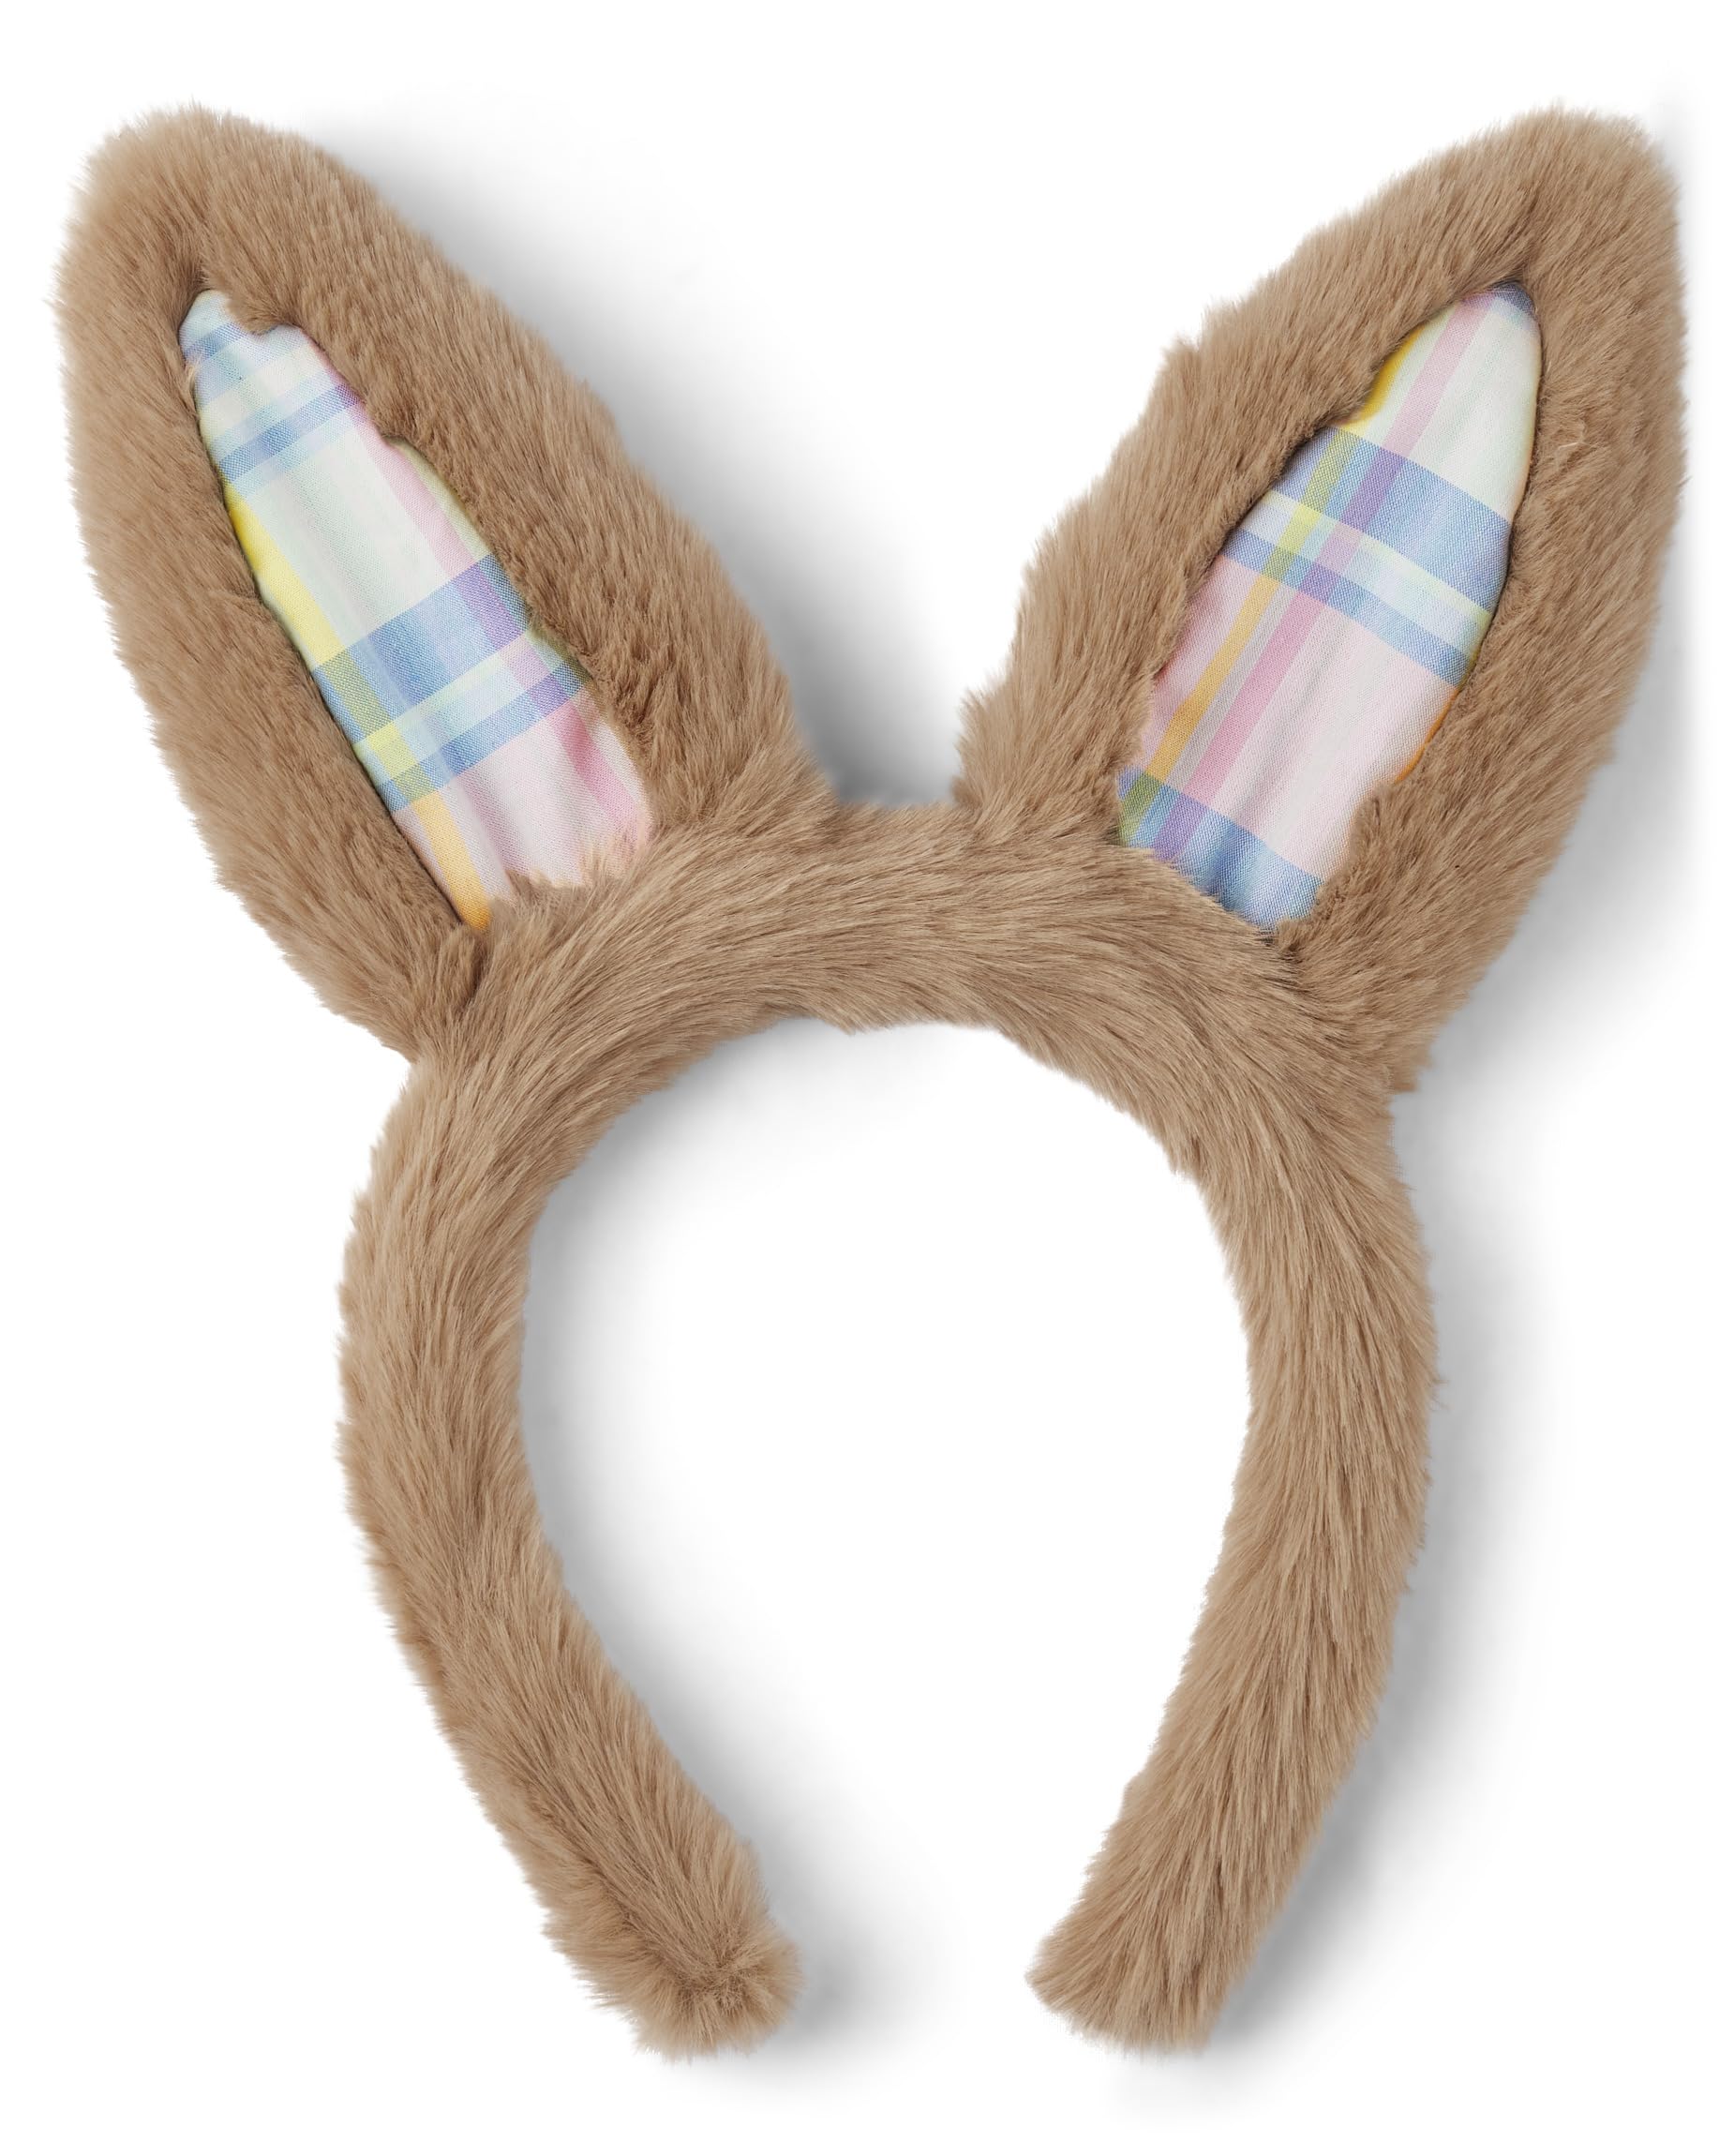 Gymboree,and Toddler Bunny Ear Easter Headband Hair Accessories,Plaid Bunny Ear,One Size